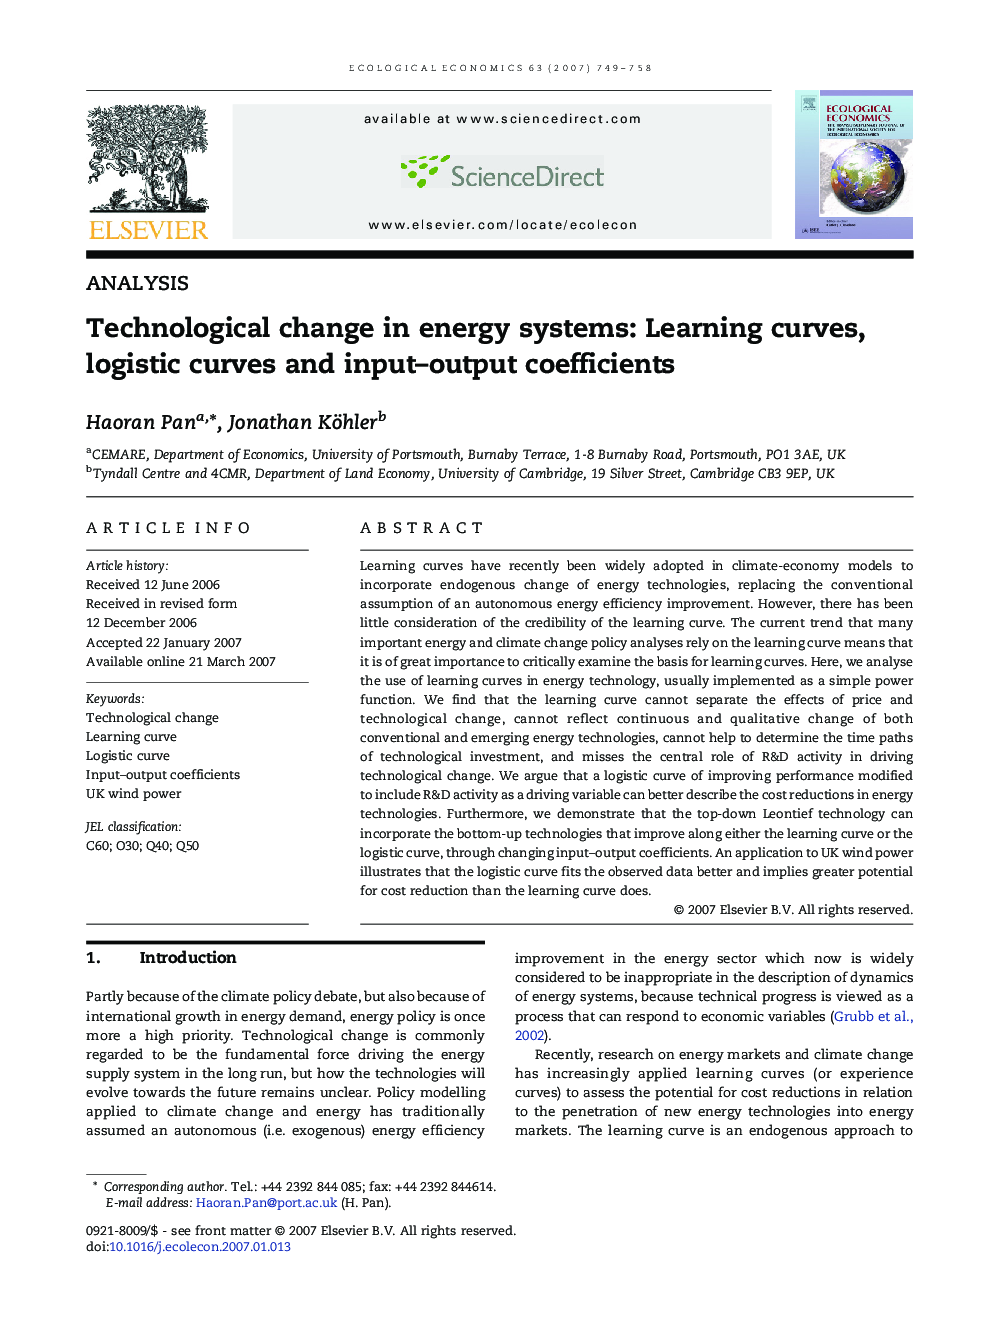 Technological change in energy systems: Learning curves, logistic curves and input-output coefficients